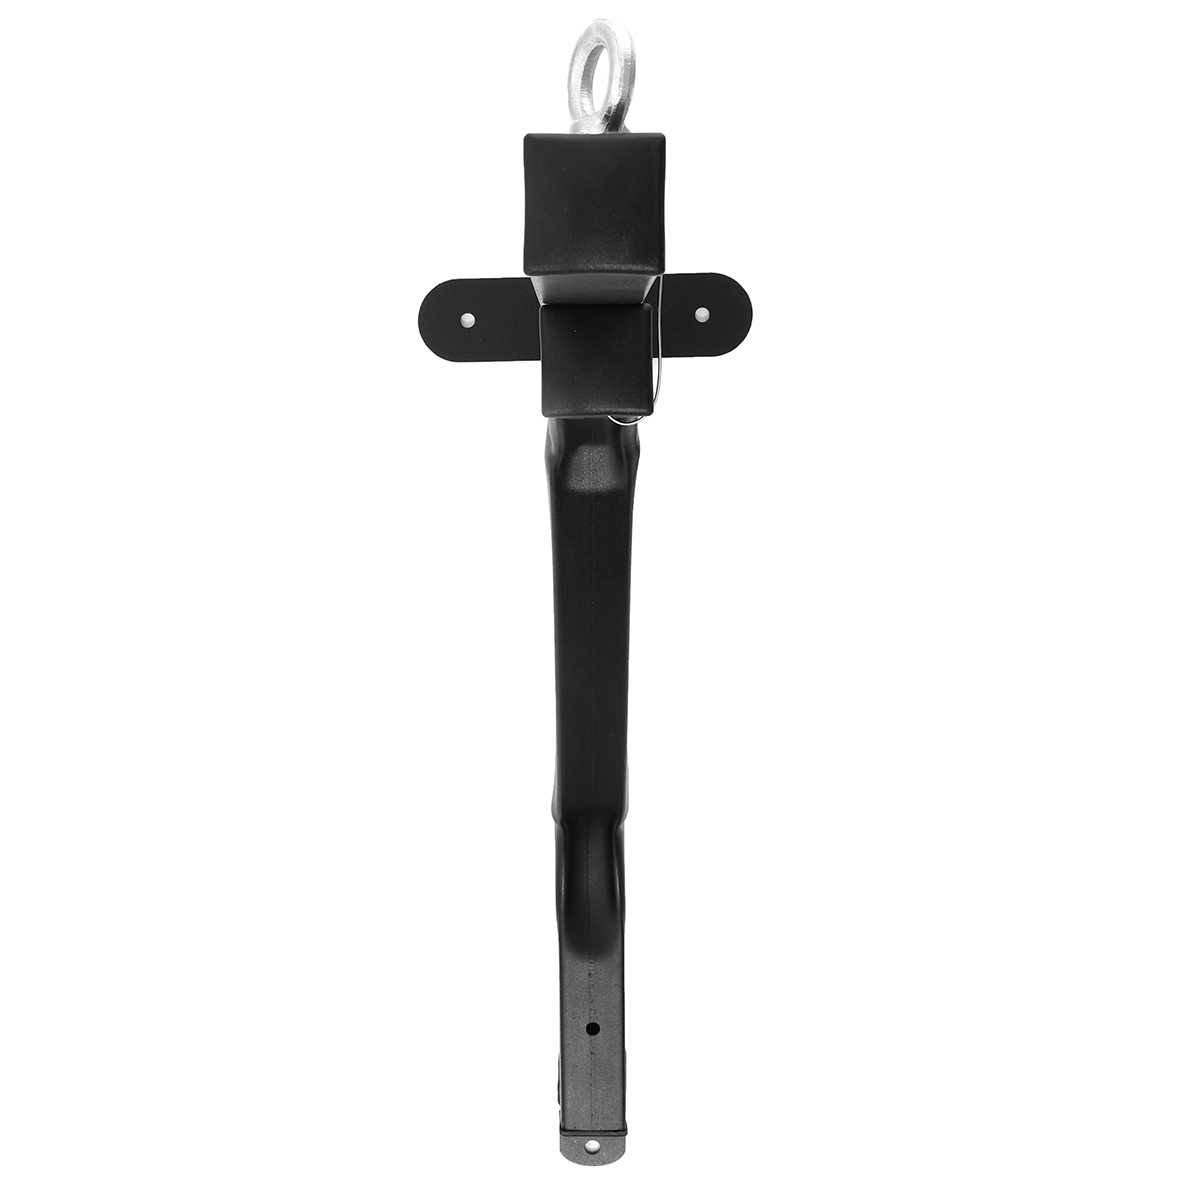 Heavy-Duty-Iron-Boxing-Punch-Bag-Wall-Bracket-Mount-Hanging-Stand-Holder-Hanger-1724188